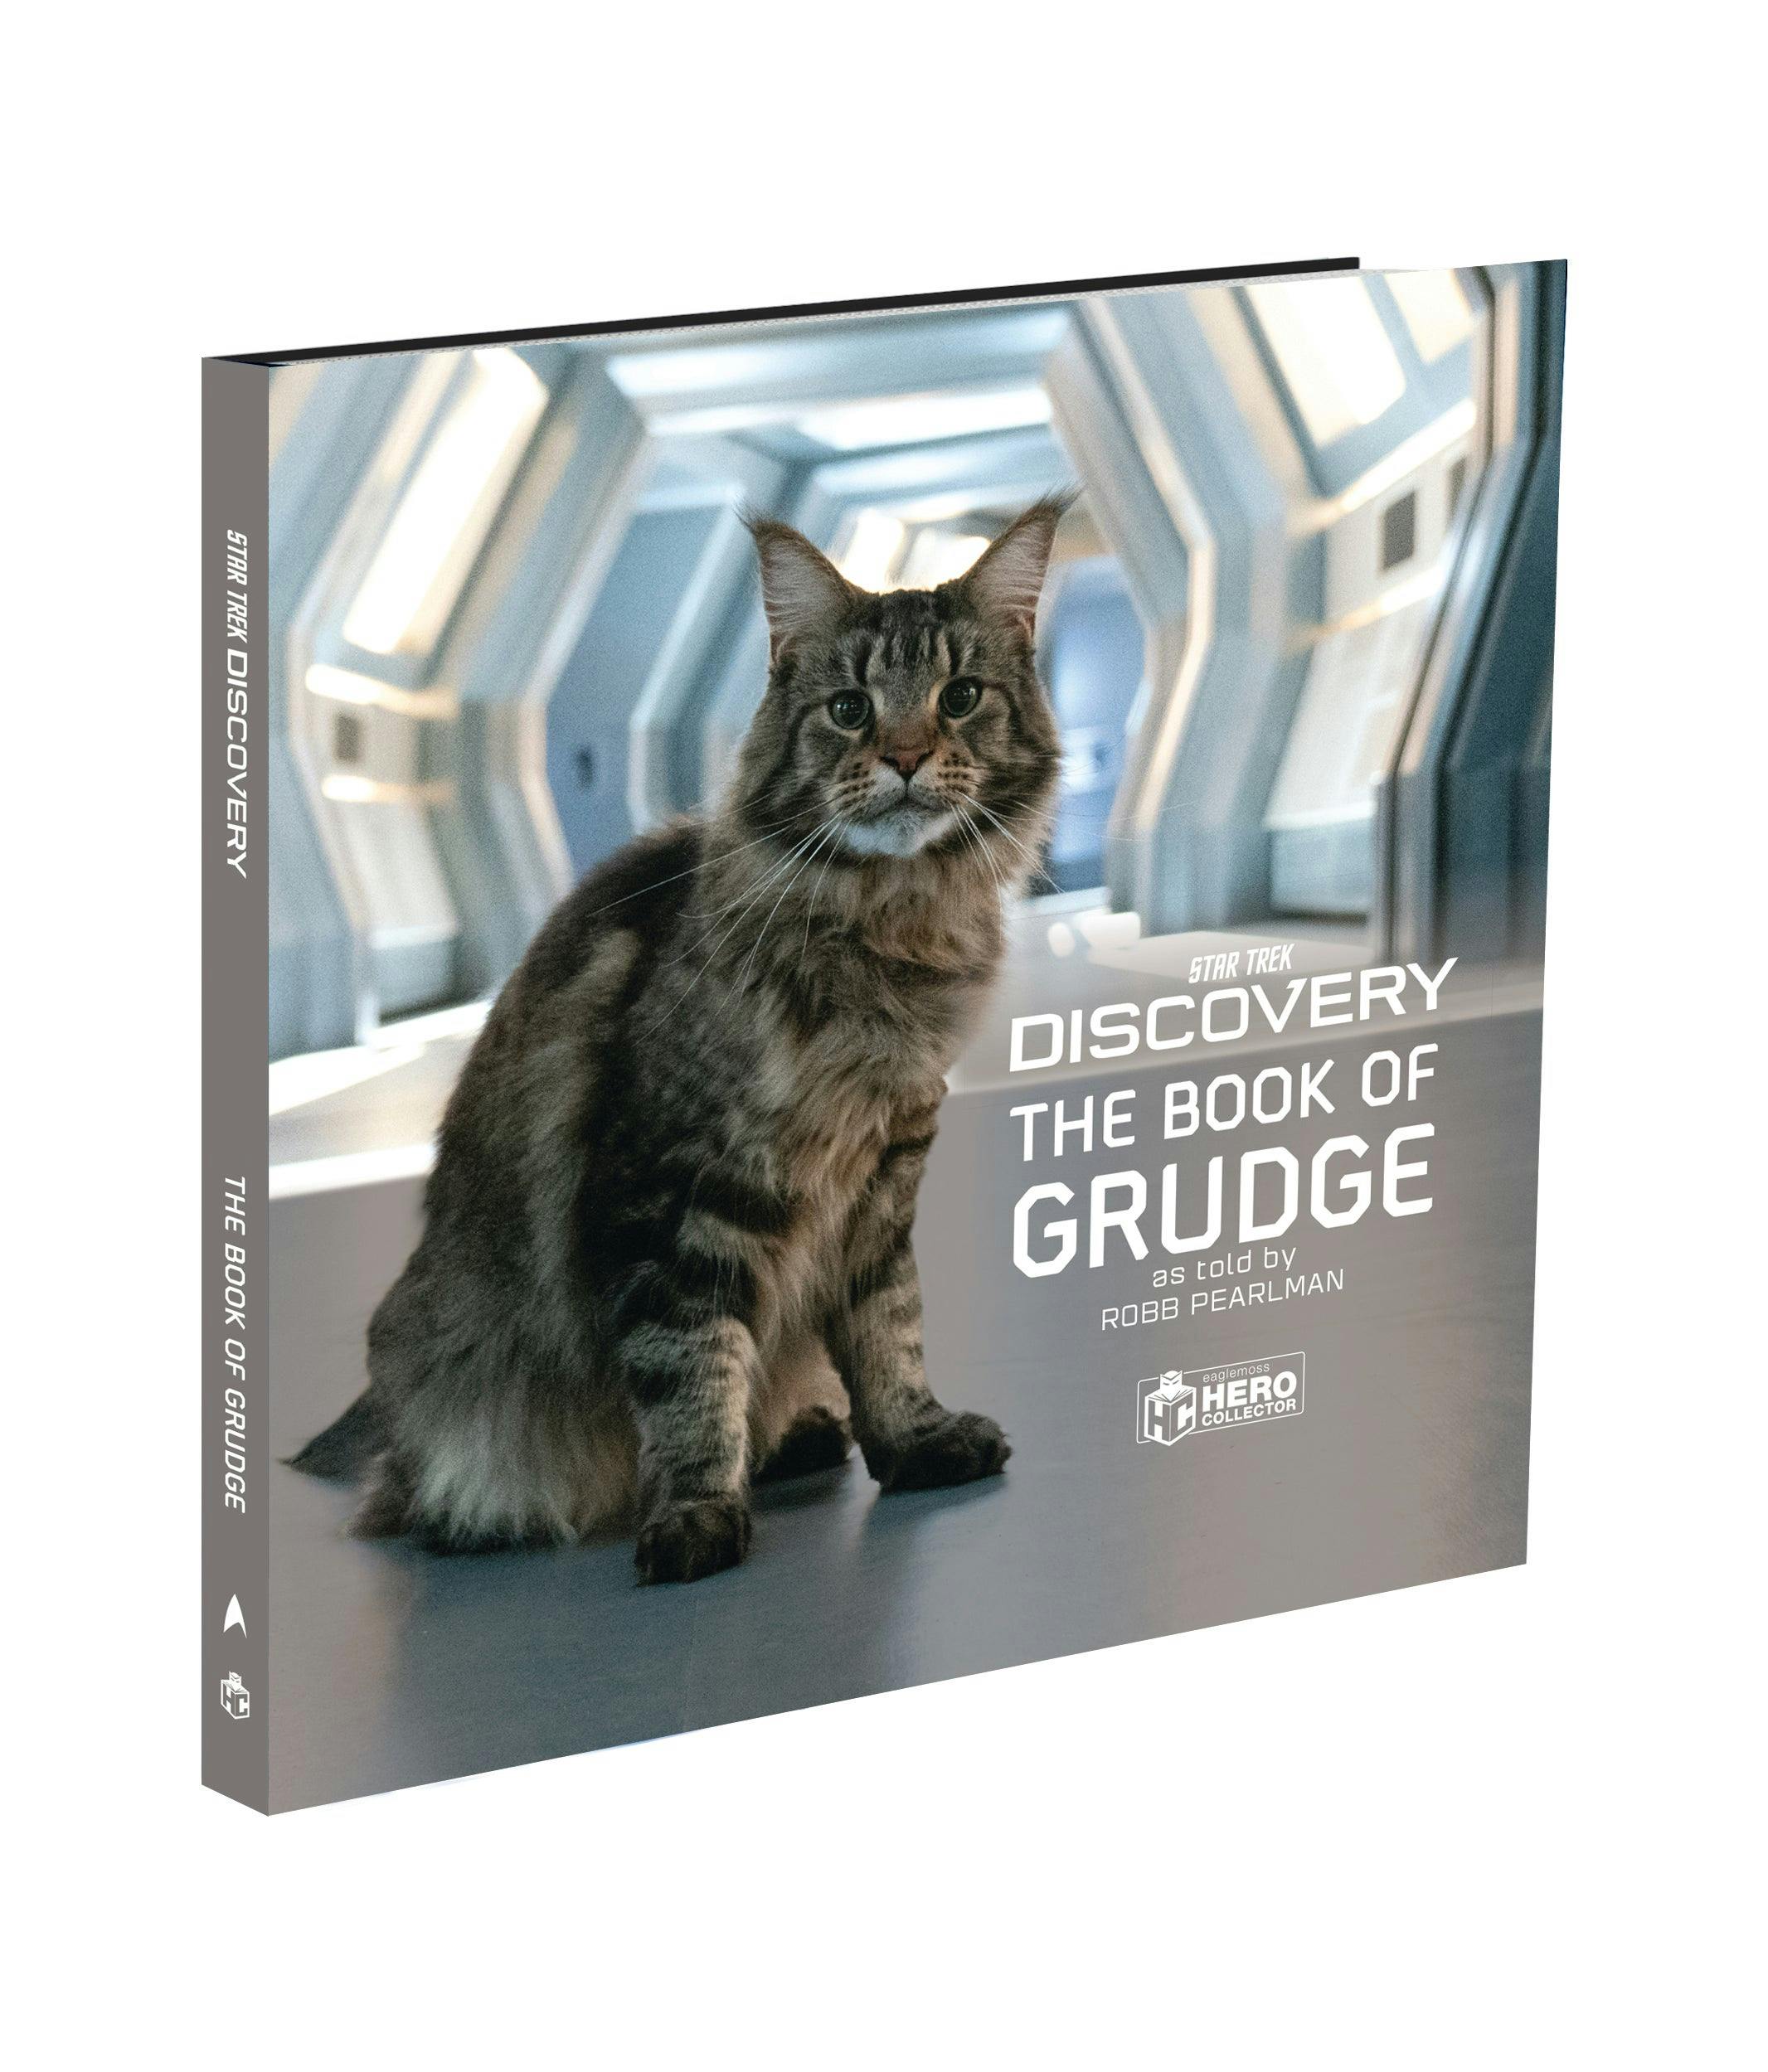 Star Trek: Discovery: The Book of Grudge